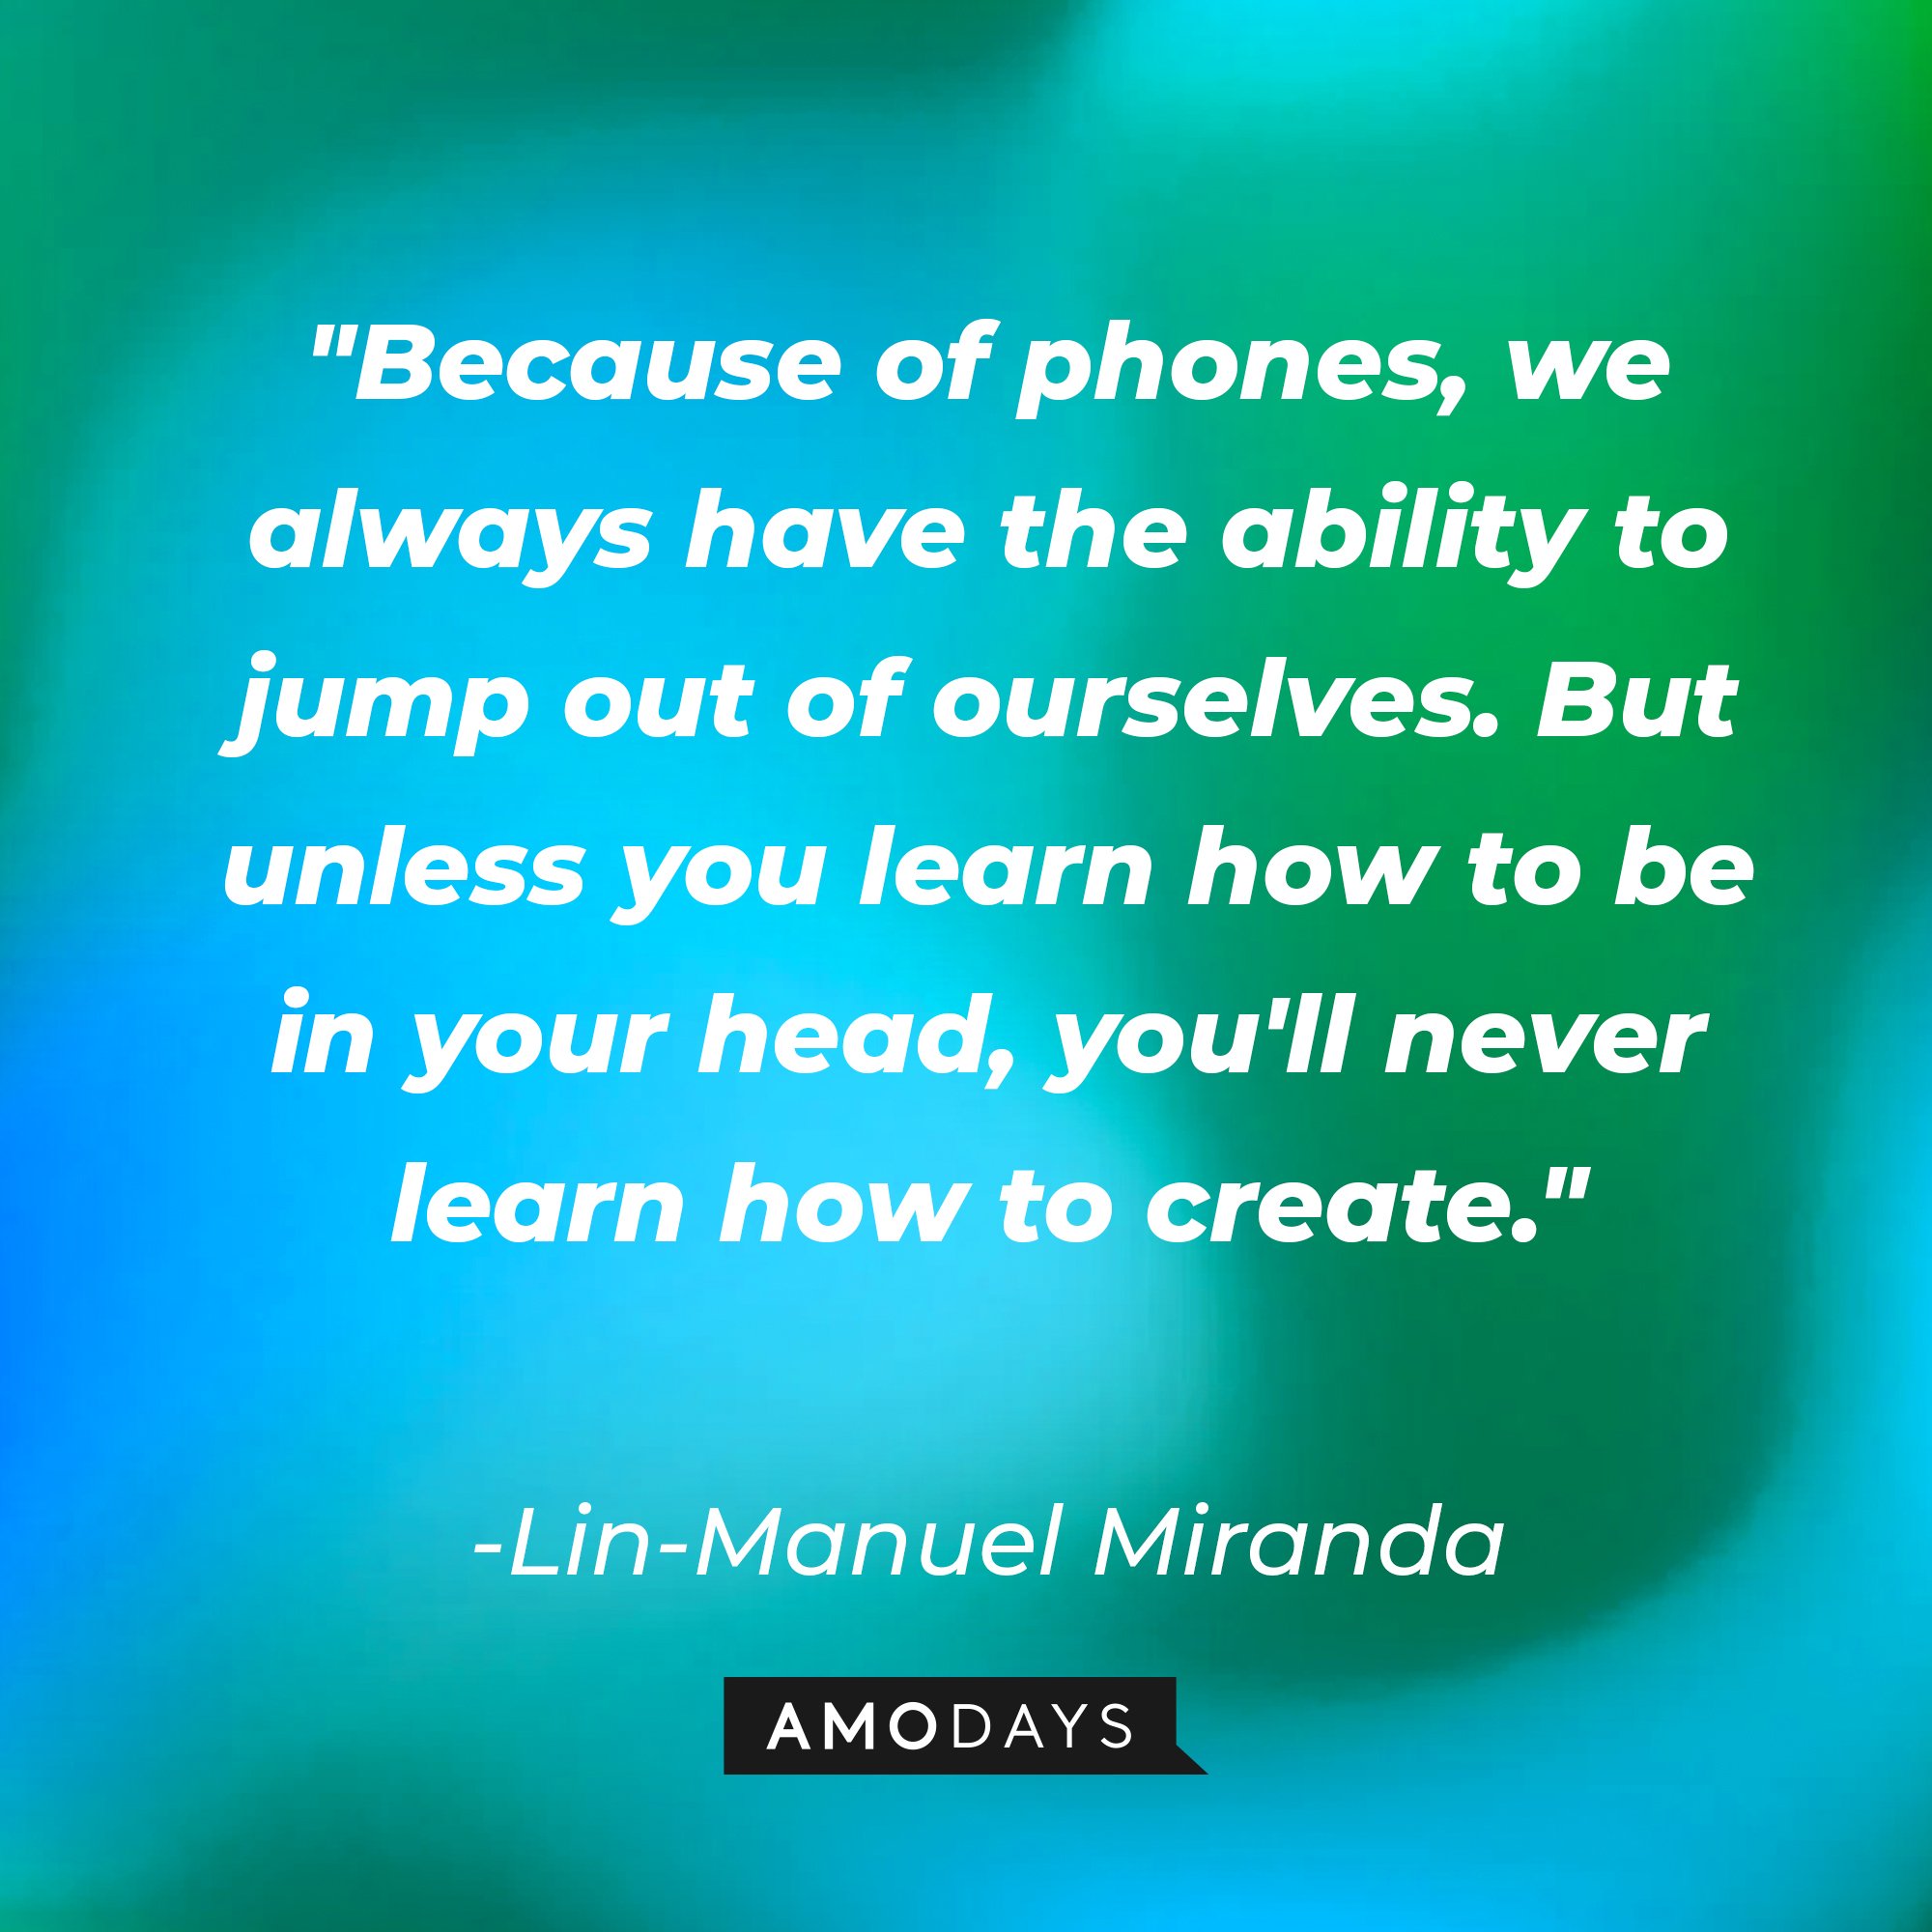 Lin-Manuel Miranda's quote: "Because of phones, we always have the ability to jump out of ourselves. But unless you learn how to be in your head, you'll never learn how to create." | Image: AmoDays